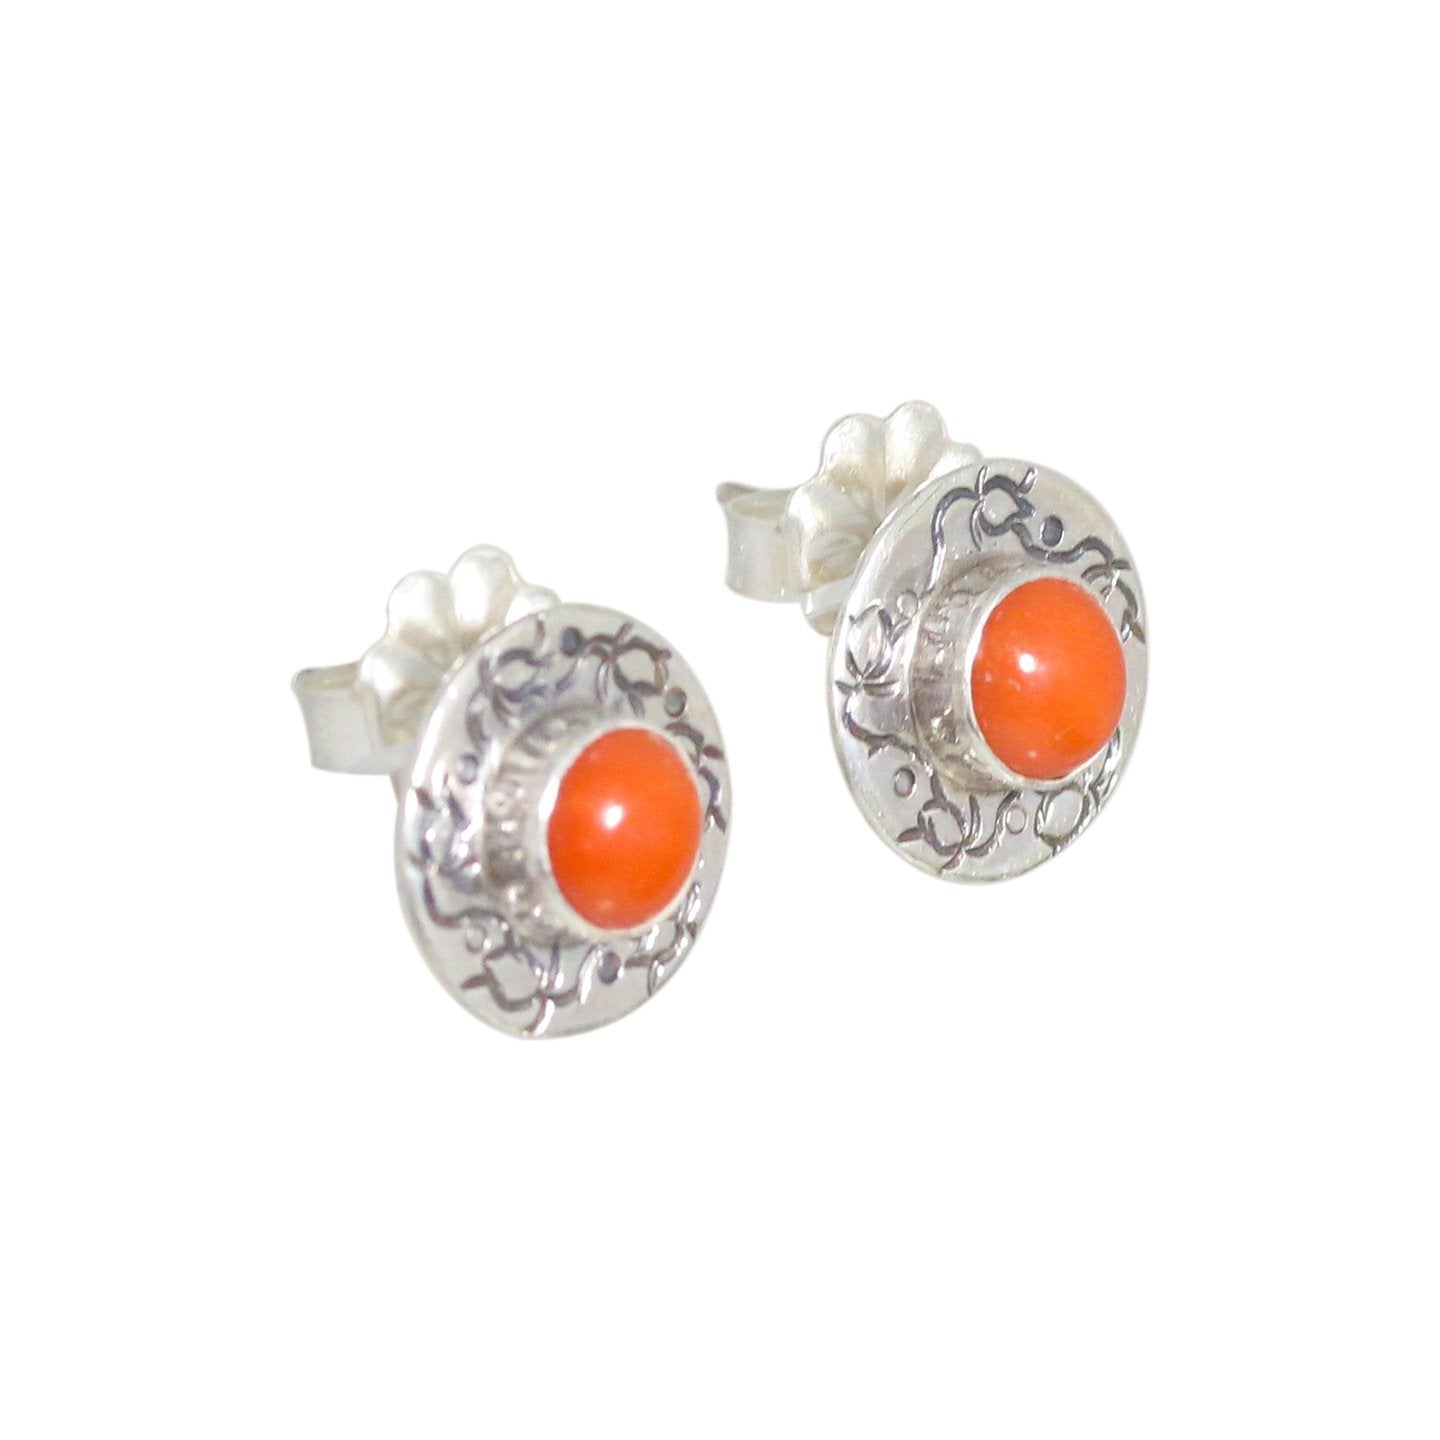 Red Italian Coral Earrings Sterling Style Posts 7Mm Round, -NewWorldGems